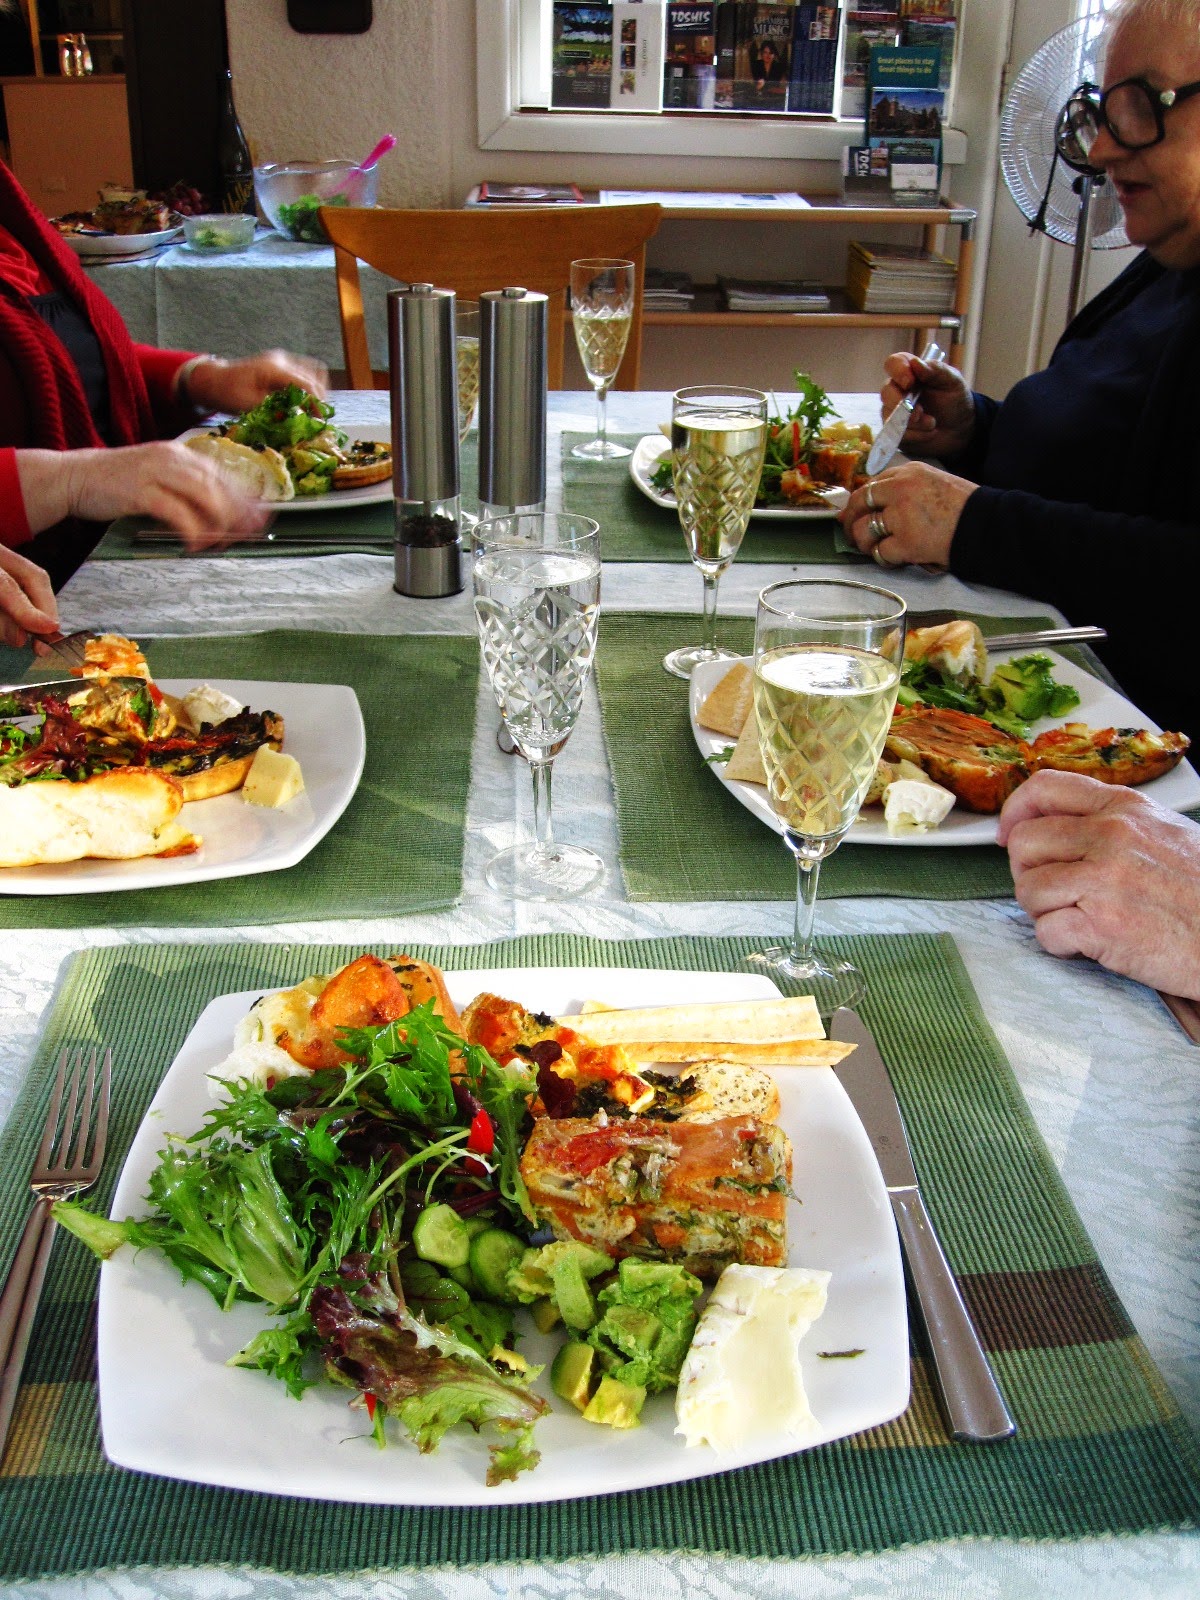 Table with five people eating lunch with glasses of sparkling wine.